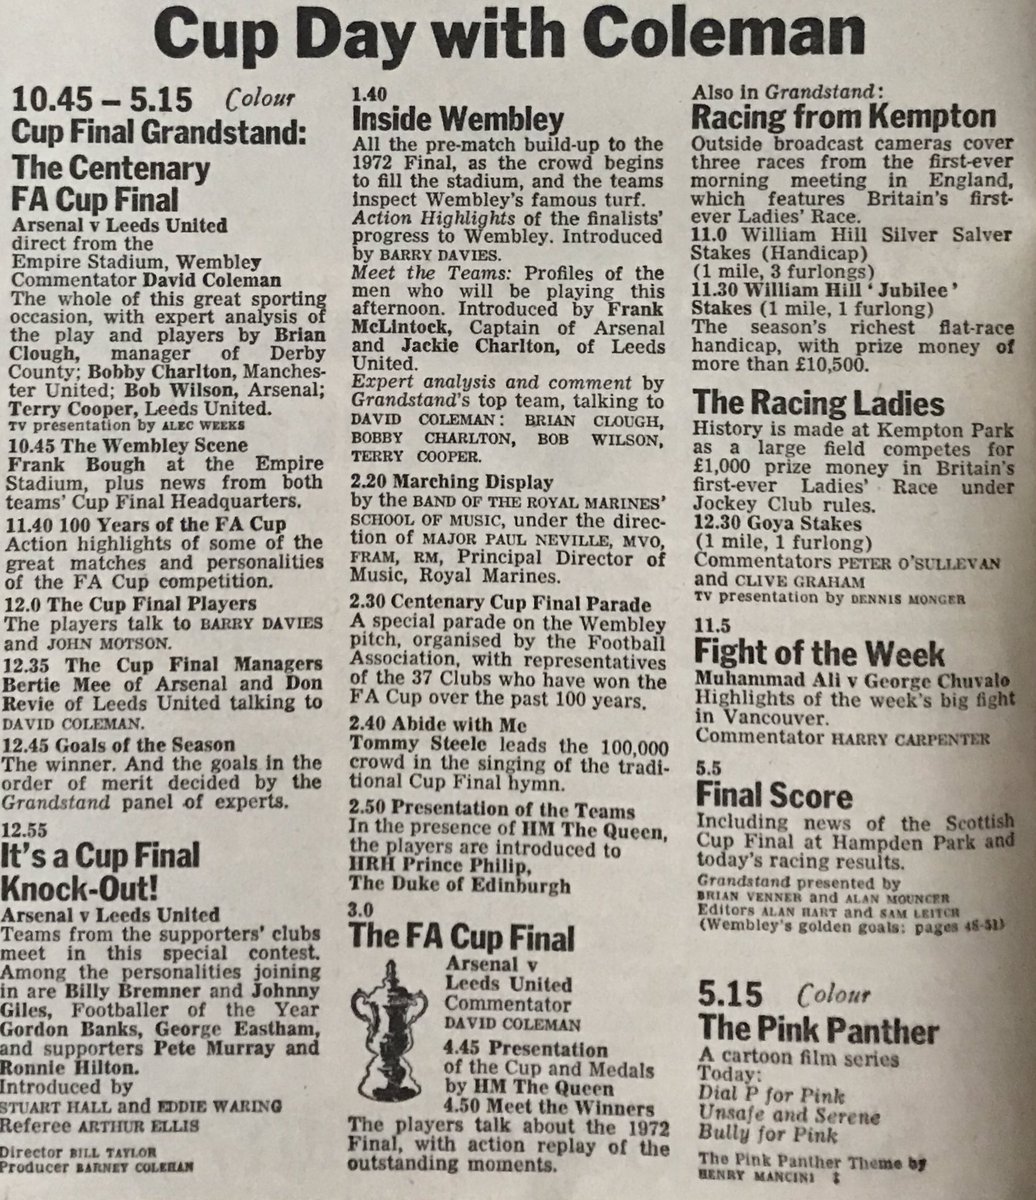 On This Day 1972
We had a great day of FA Cup Final build up on ITV & BBC
Nothing compares today!
#FACup